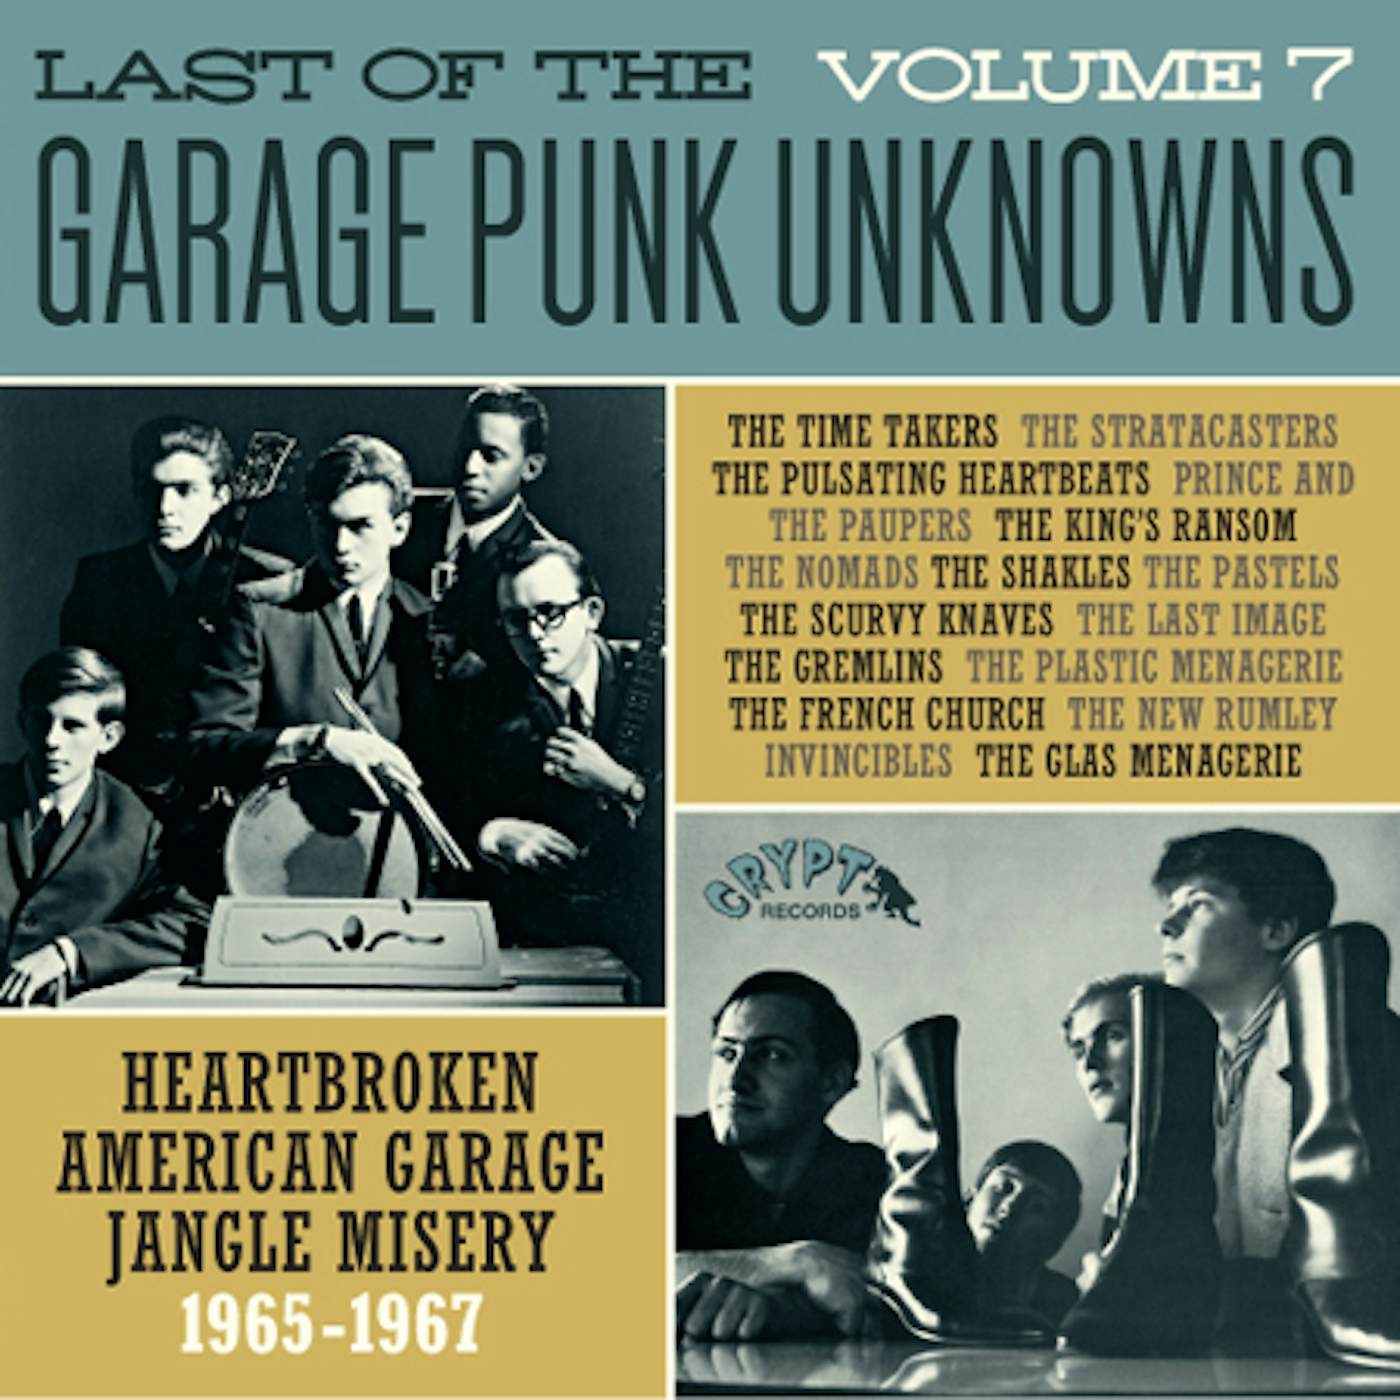 LAST OF THE GARAGE PUNK UNKNOWNS 7 / VARIOUS Vinyl Record